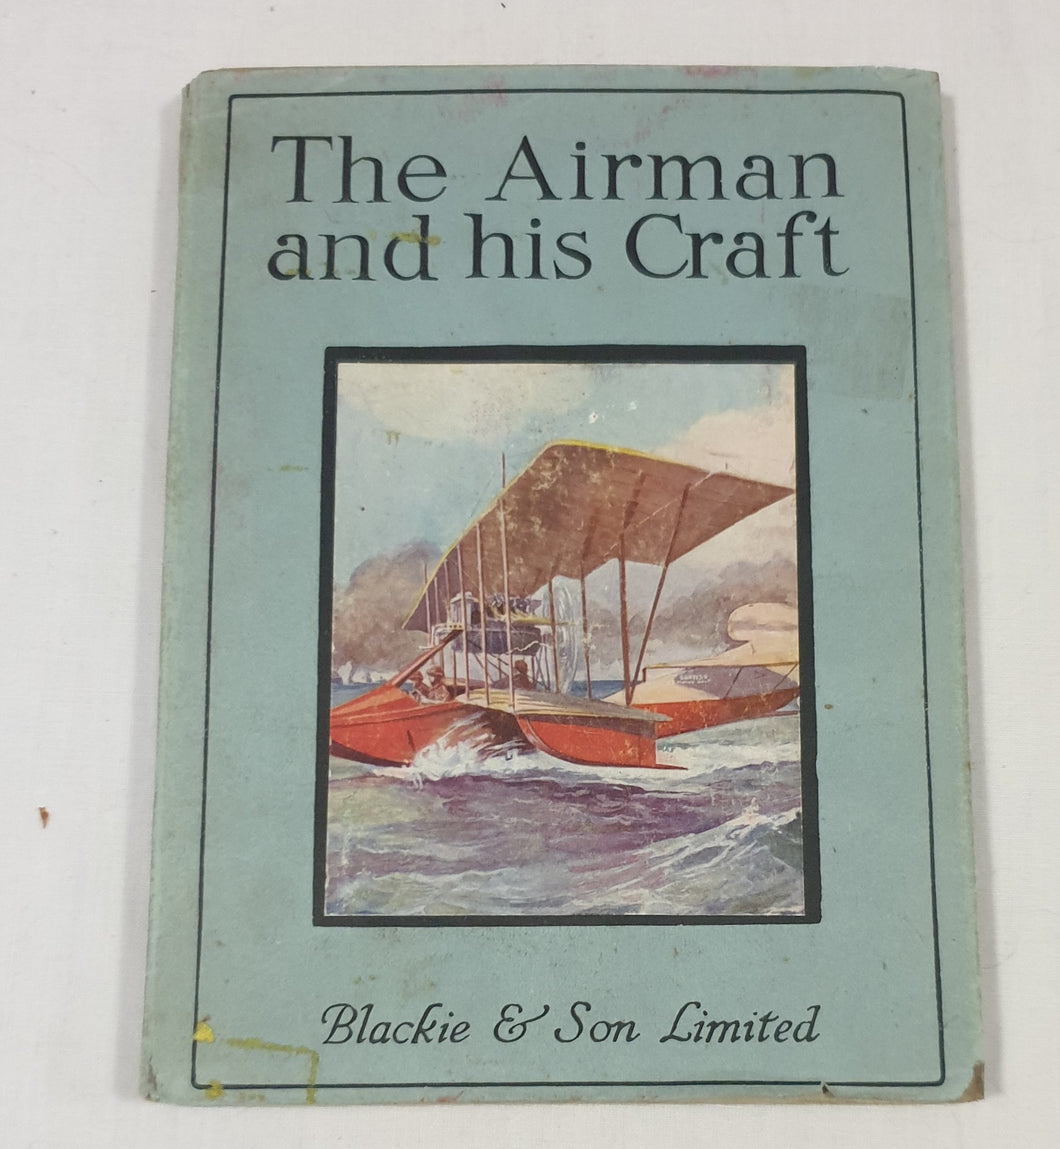 The Airman and His Craft by William J. Claxton